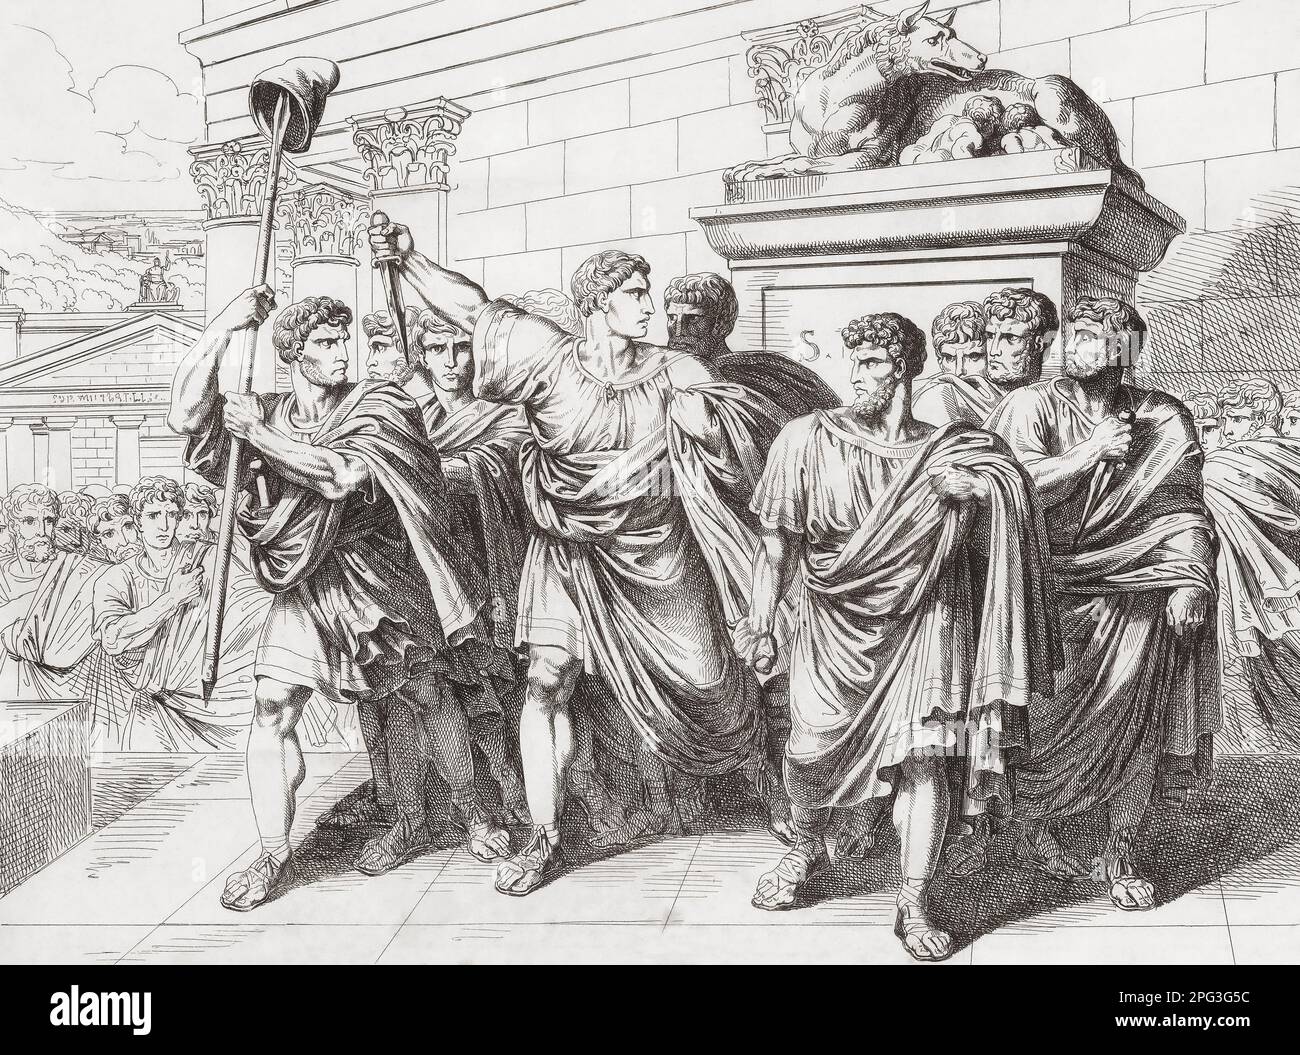 Marcus Junius Brutus and fellow conspirators after assassinating Julius Caesar on March 15, 44 BC.  After a 19th century work by Bartolomeo Pinelli. Stock Photo